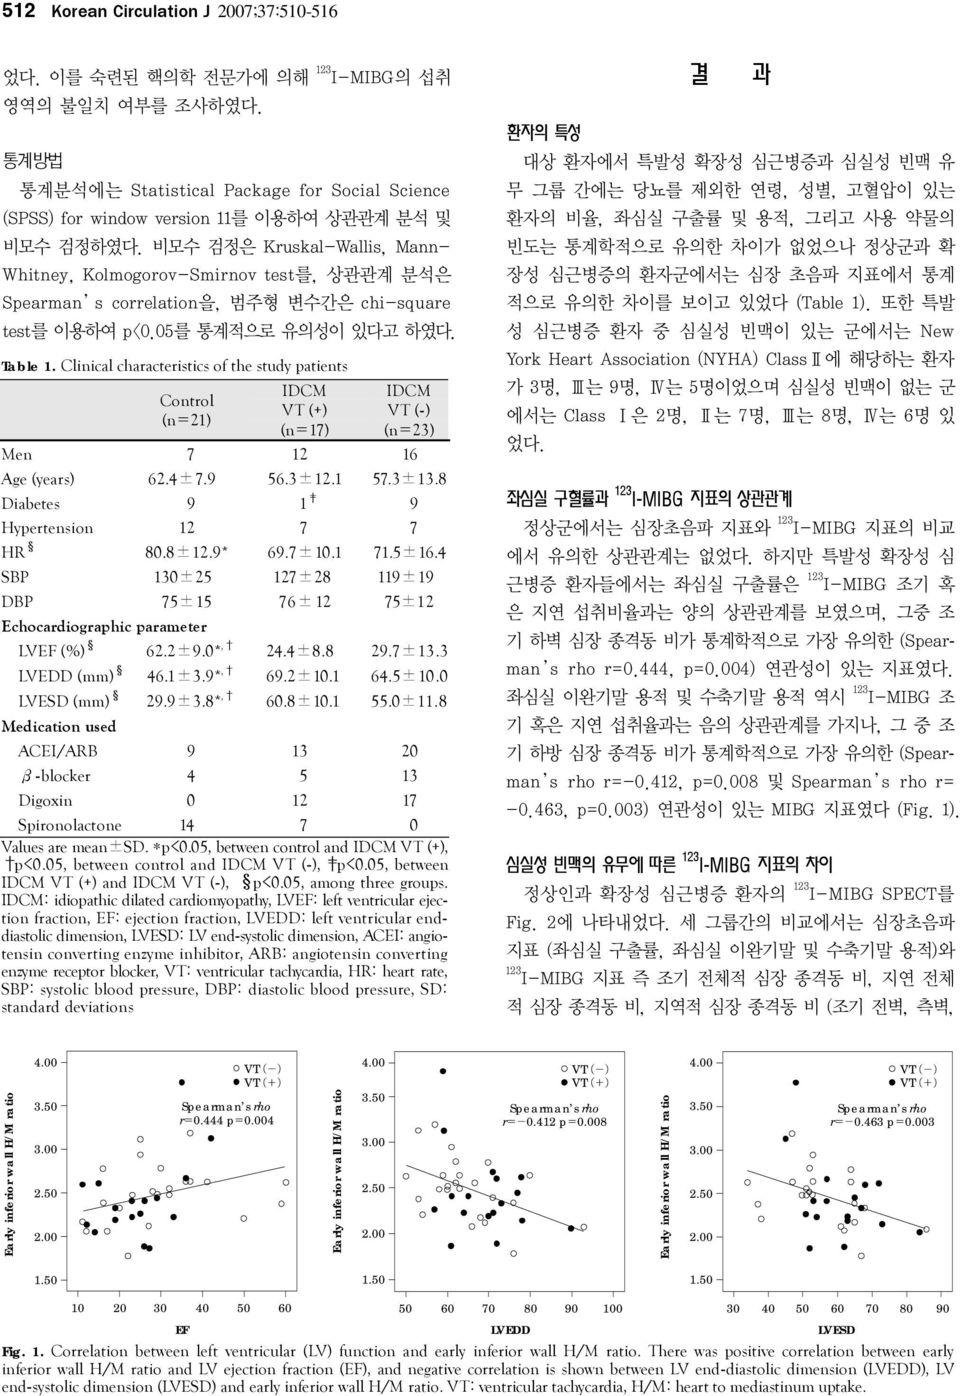 Clinical characteristics of the study patients Control (n=21) Men 07 12 16 Age (years) 62.4±7.90 56.3±12.1 57.3±13.8 Diabetes 09 01 09 Hypertension 12 07 07 HR 80.8±12.9* 69.7±10.1 71.5±16.